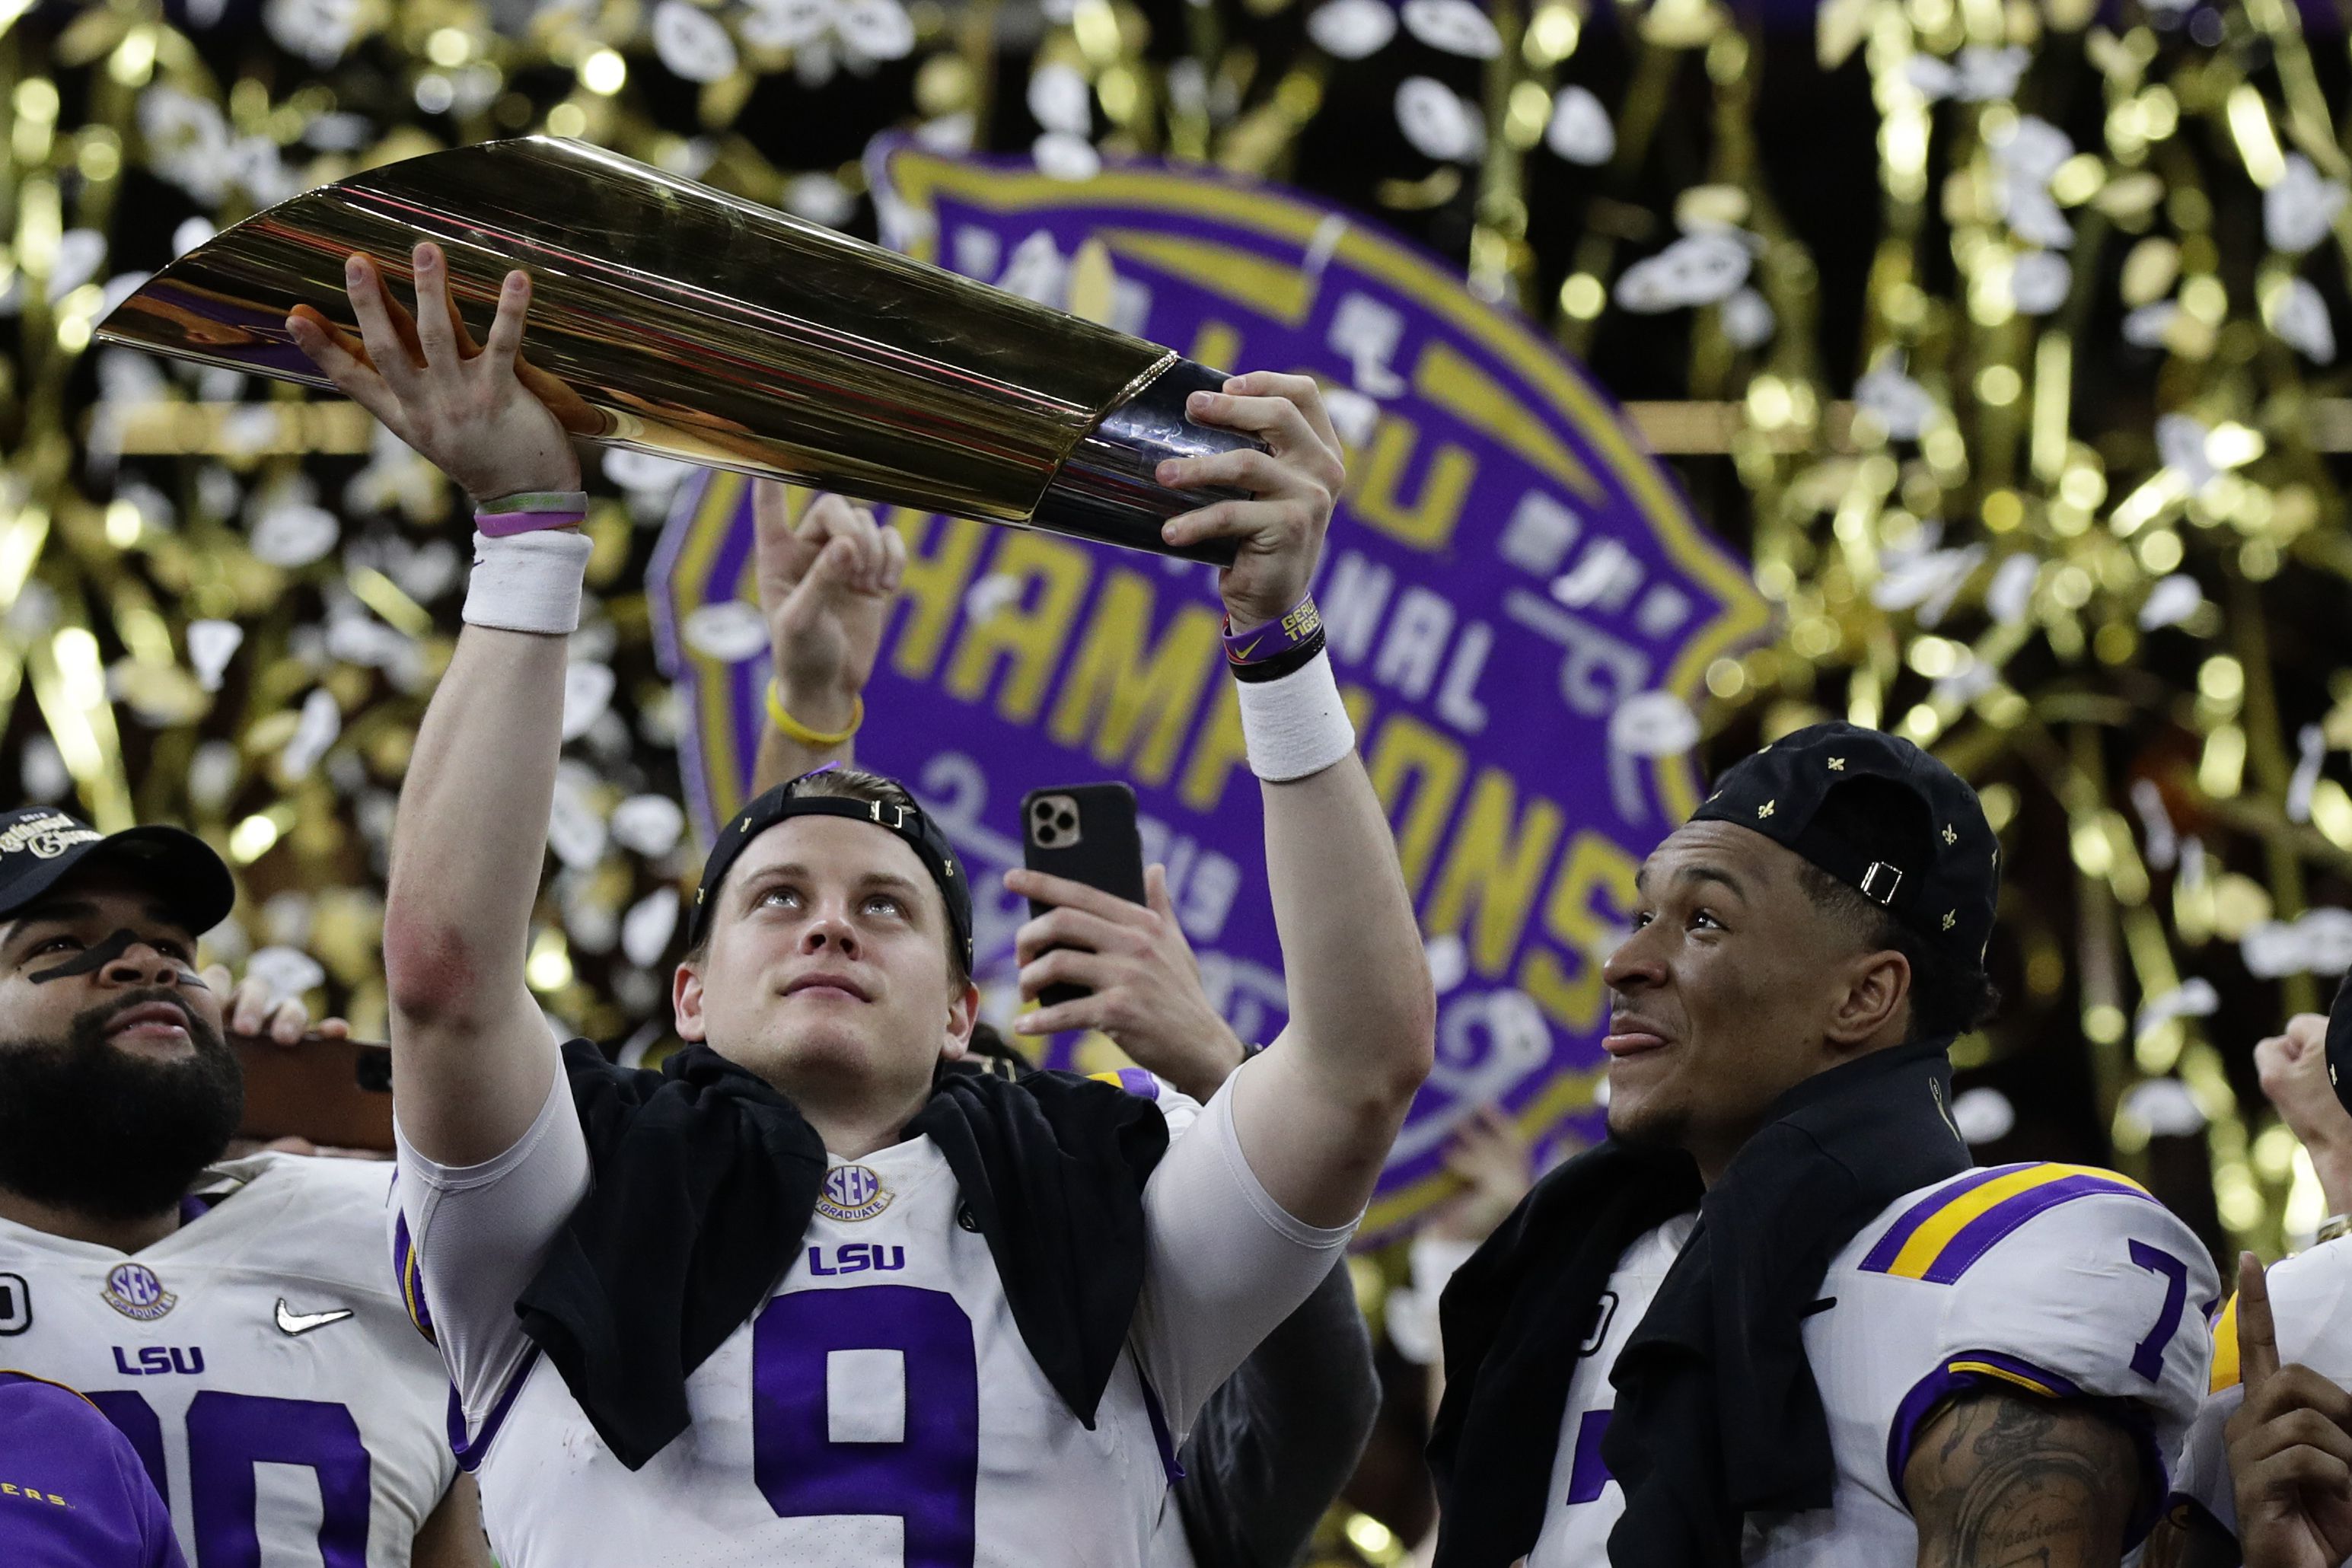 There was no stopping LSU, or its victory cigar celebration 